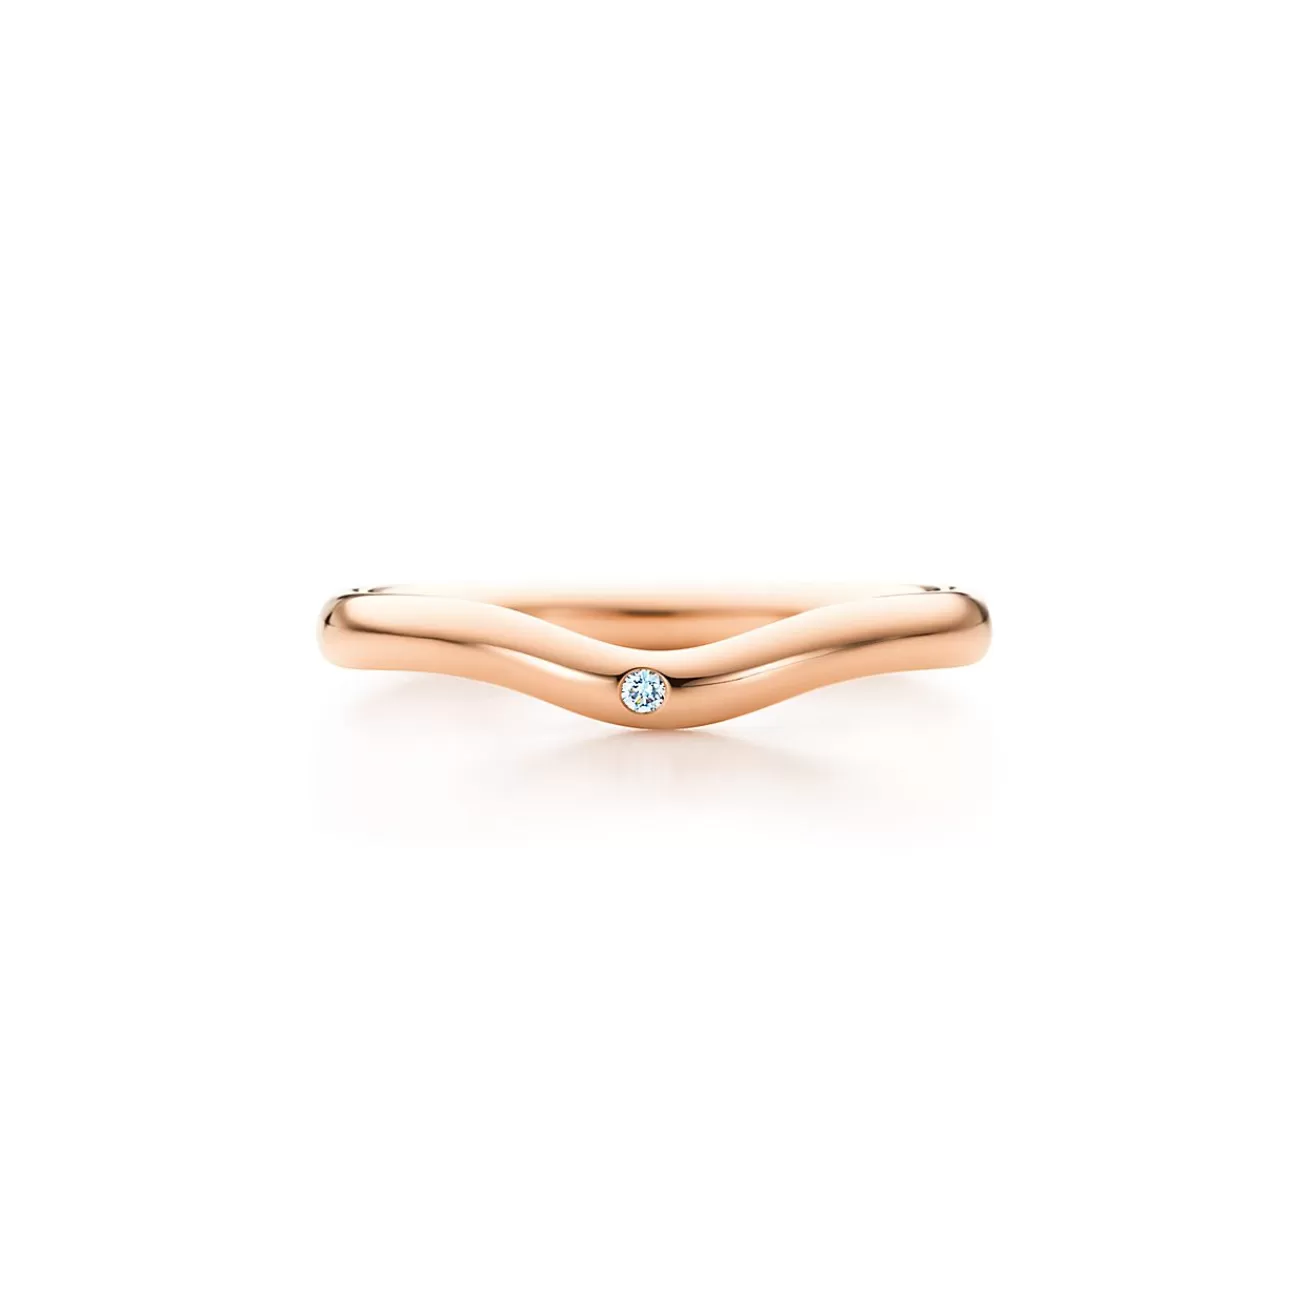 Tiffany & Co. Elsa Peretti® wedding band ring with a diamond in 18k rose gold, 2 mm wide. | ^Women Rings | Rose Gold Jewelry